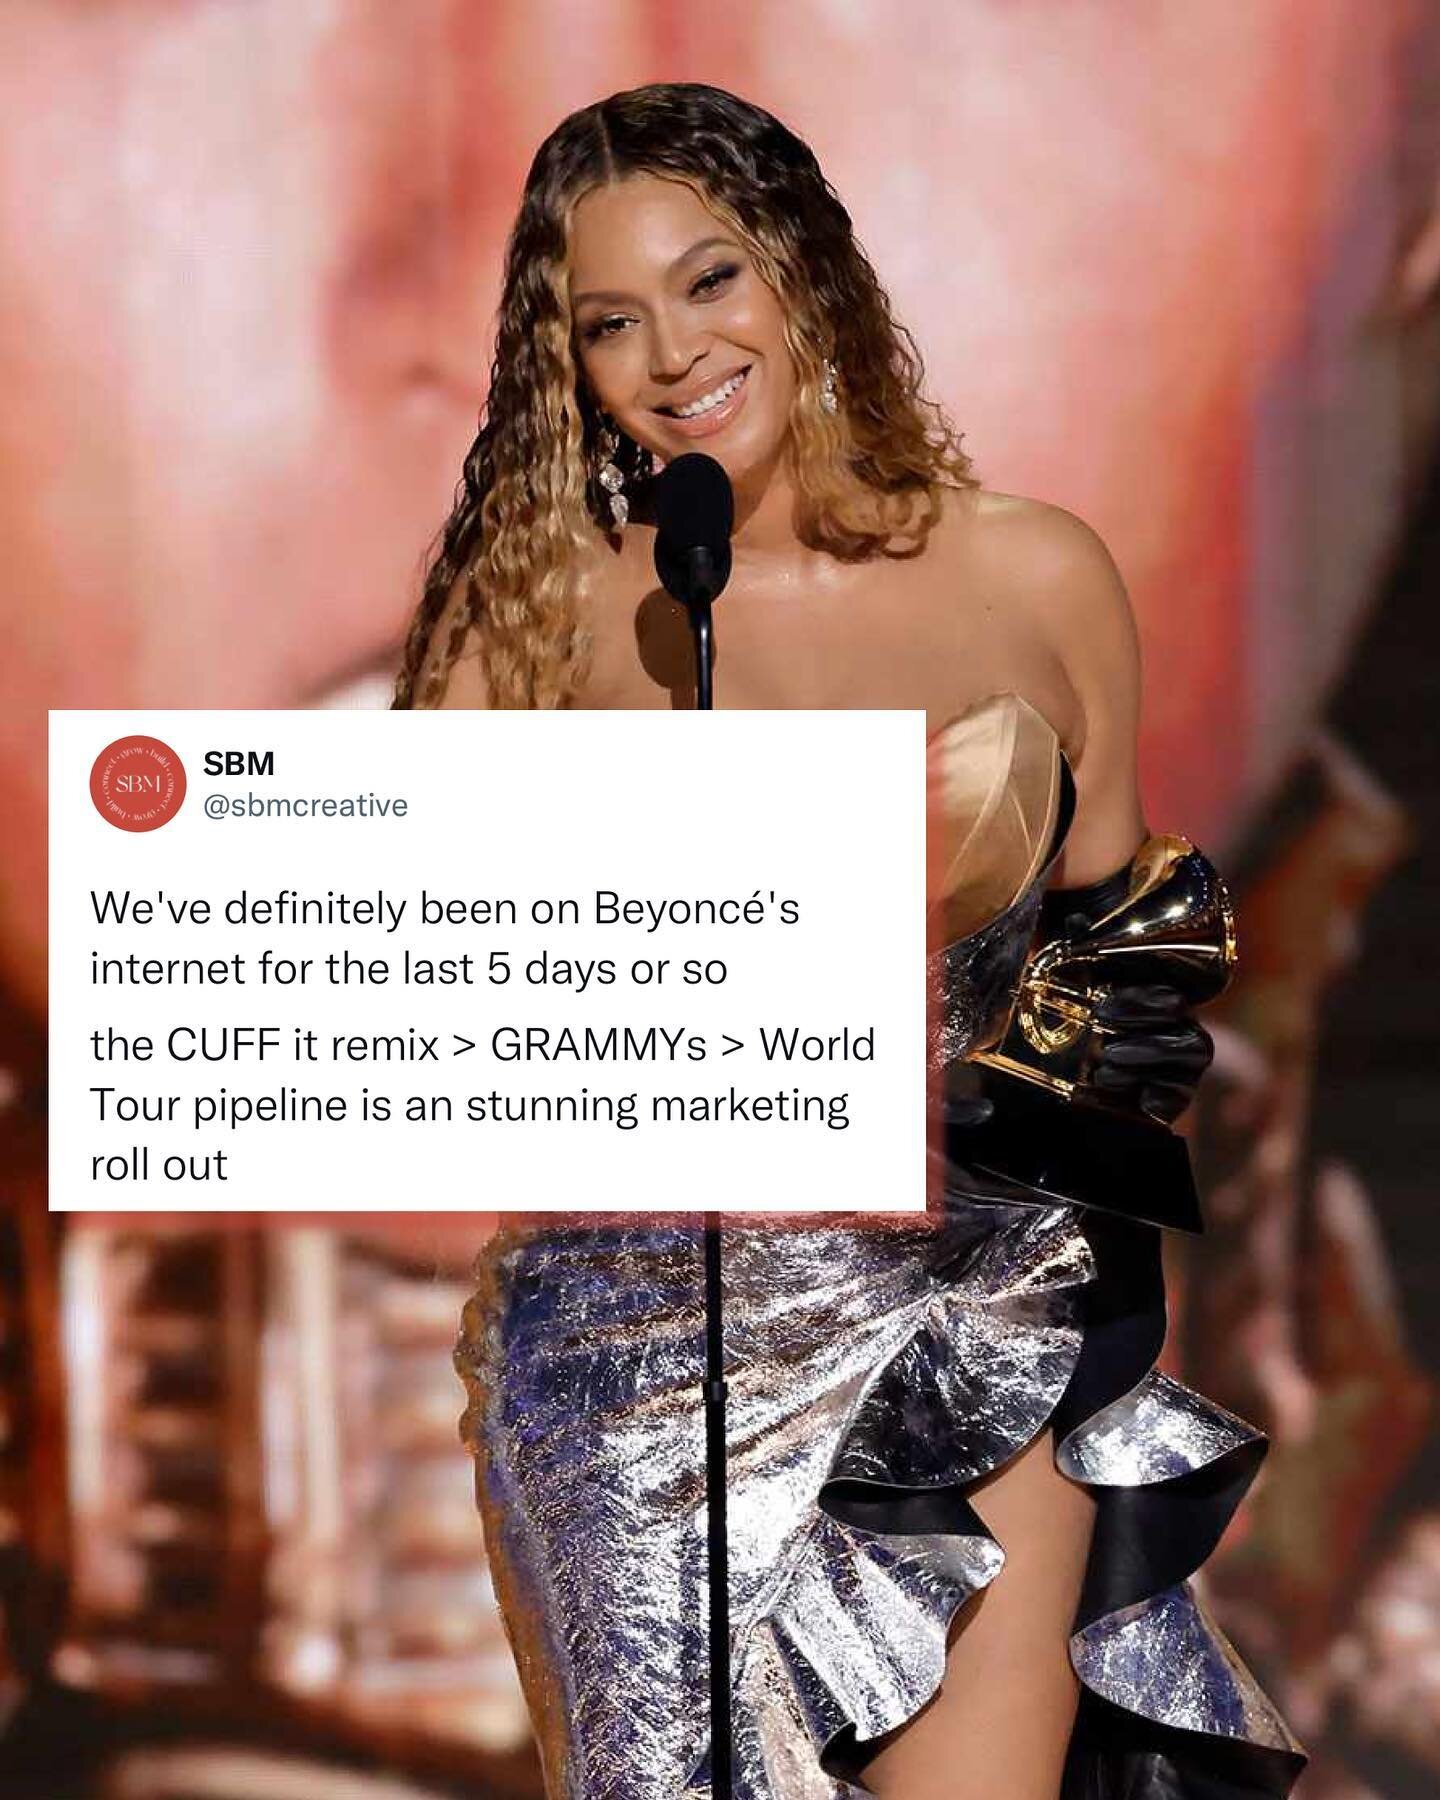 What. A. Week! The #1 hack to maximising your marketing efforts? Momentum. Everyone needs it, even #Beyonce. Here&rsquo;s the timeline &amp; what we can all learn from it:⁠
⁠
1. Friday February 3rd: Beyonc&eacute; releases &lsquo;CUFF IT (Remix)&rsqu